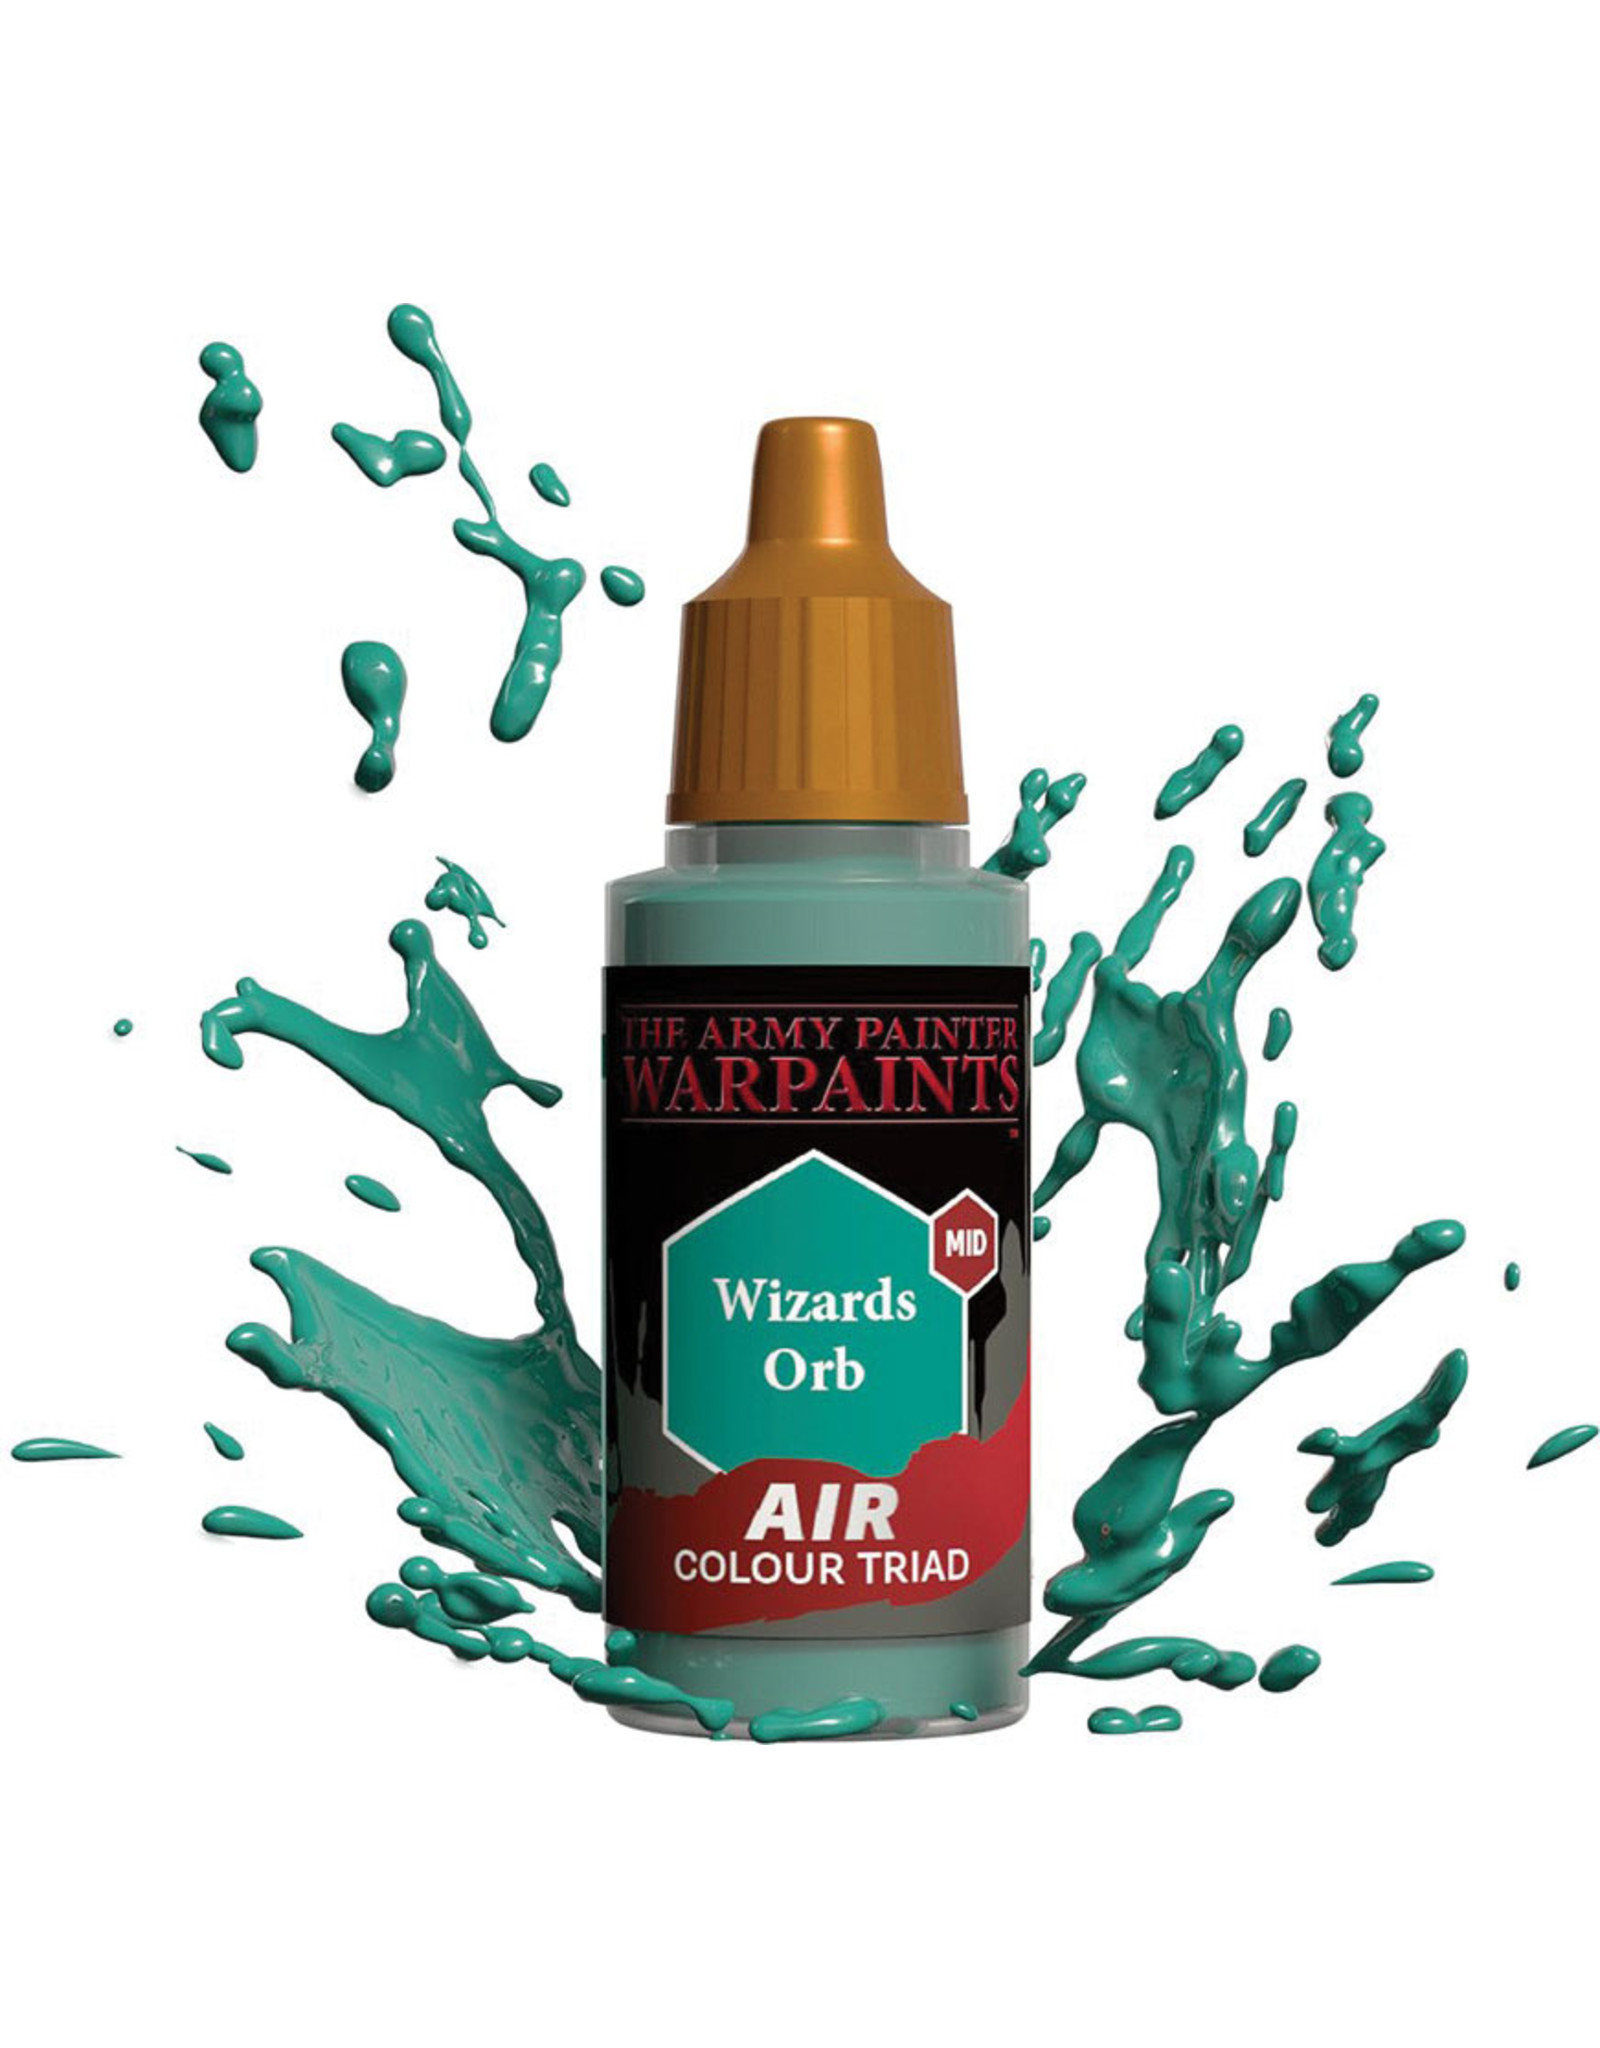 Army Painter Warpaint Air: Wizards Orb, 18ml.